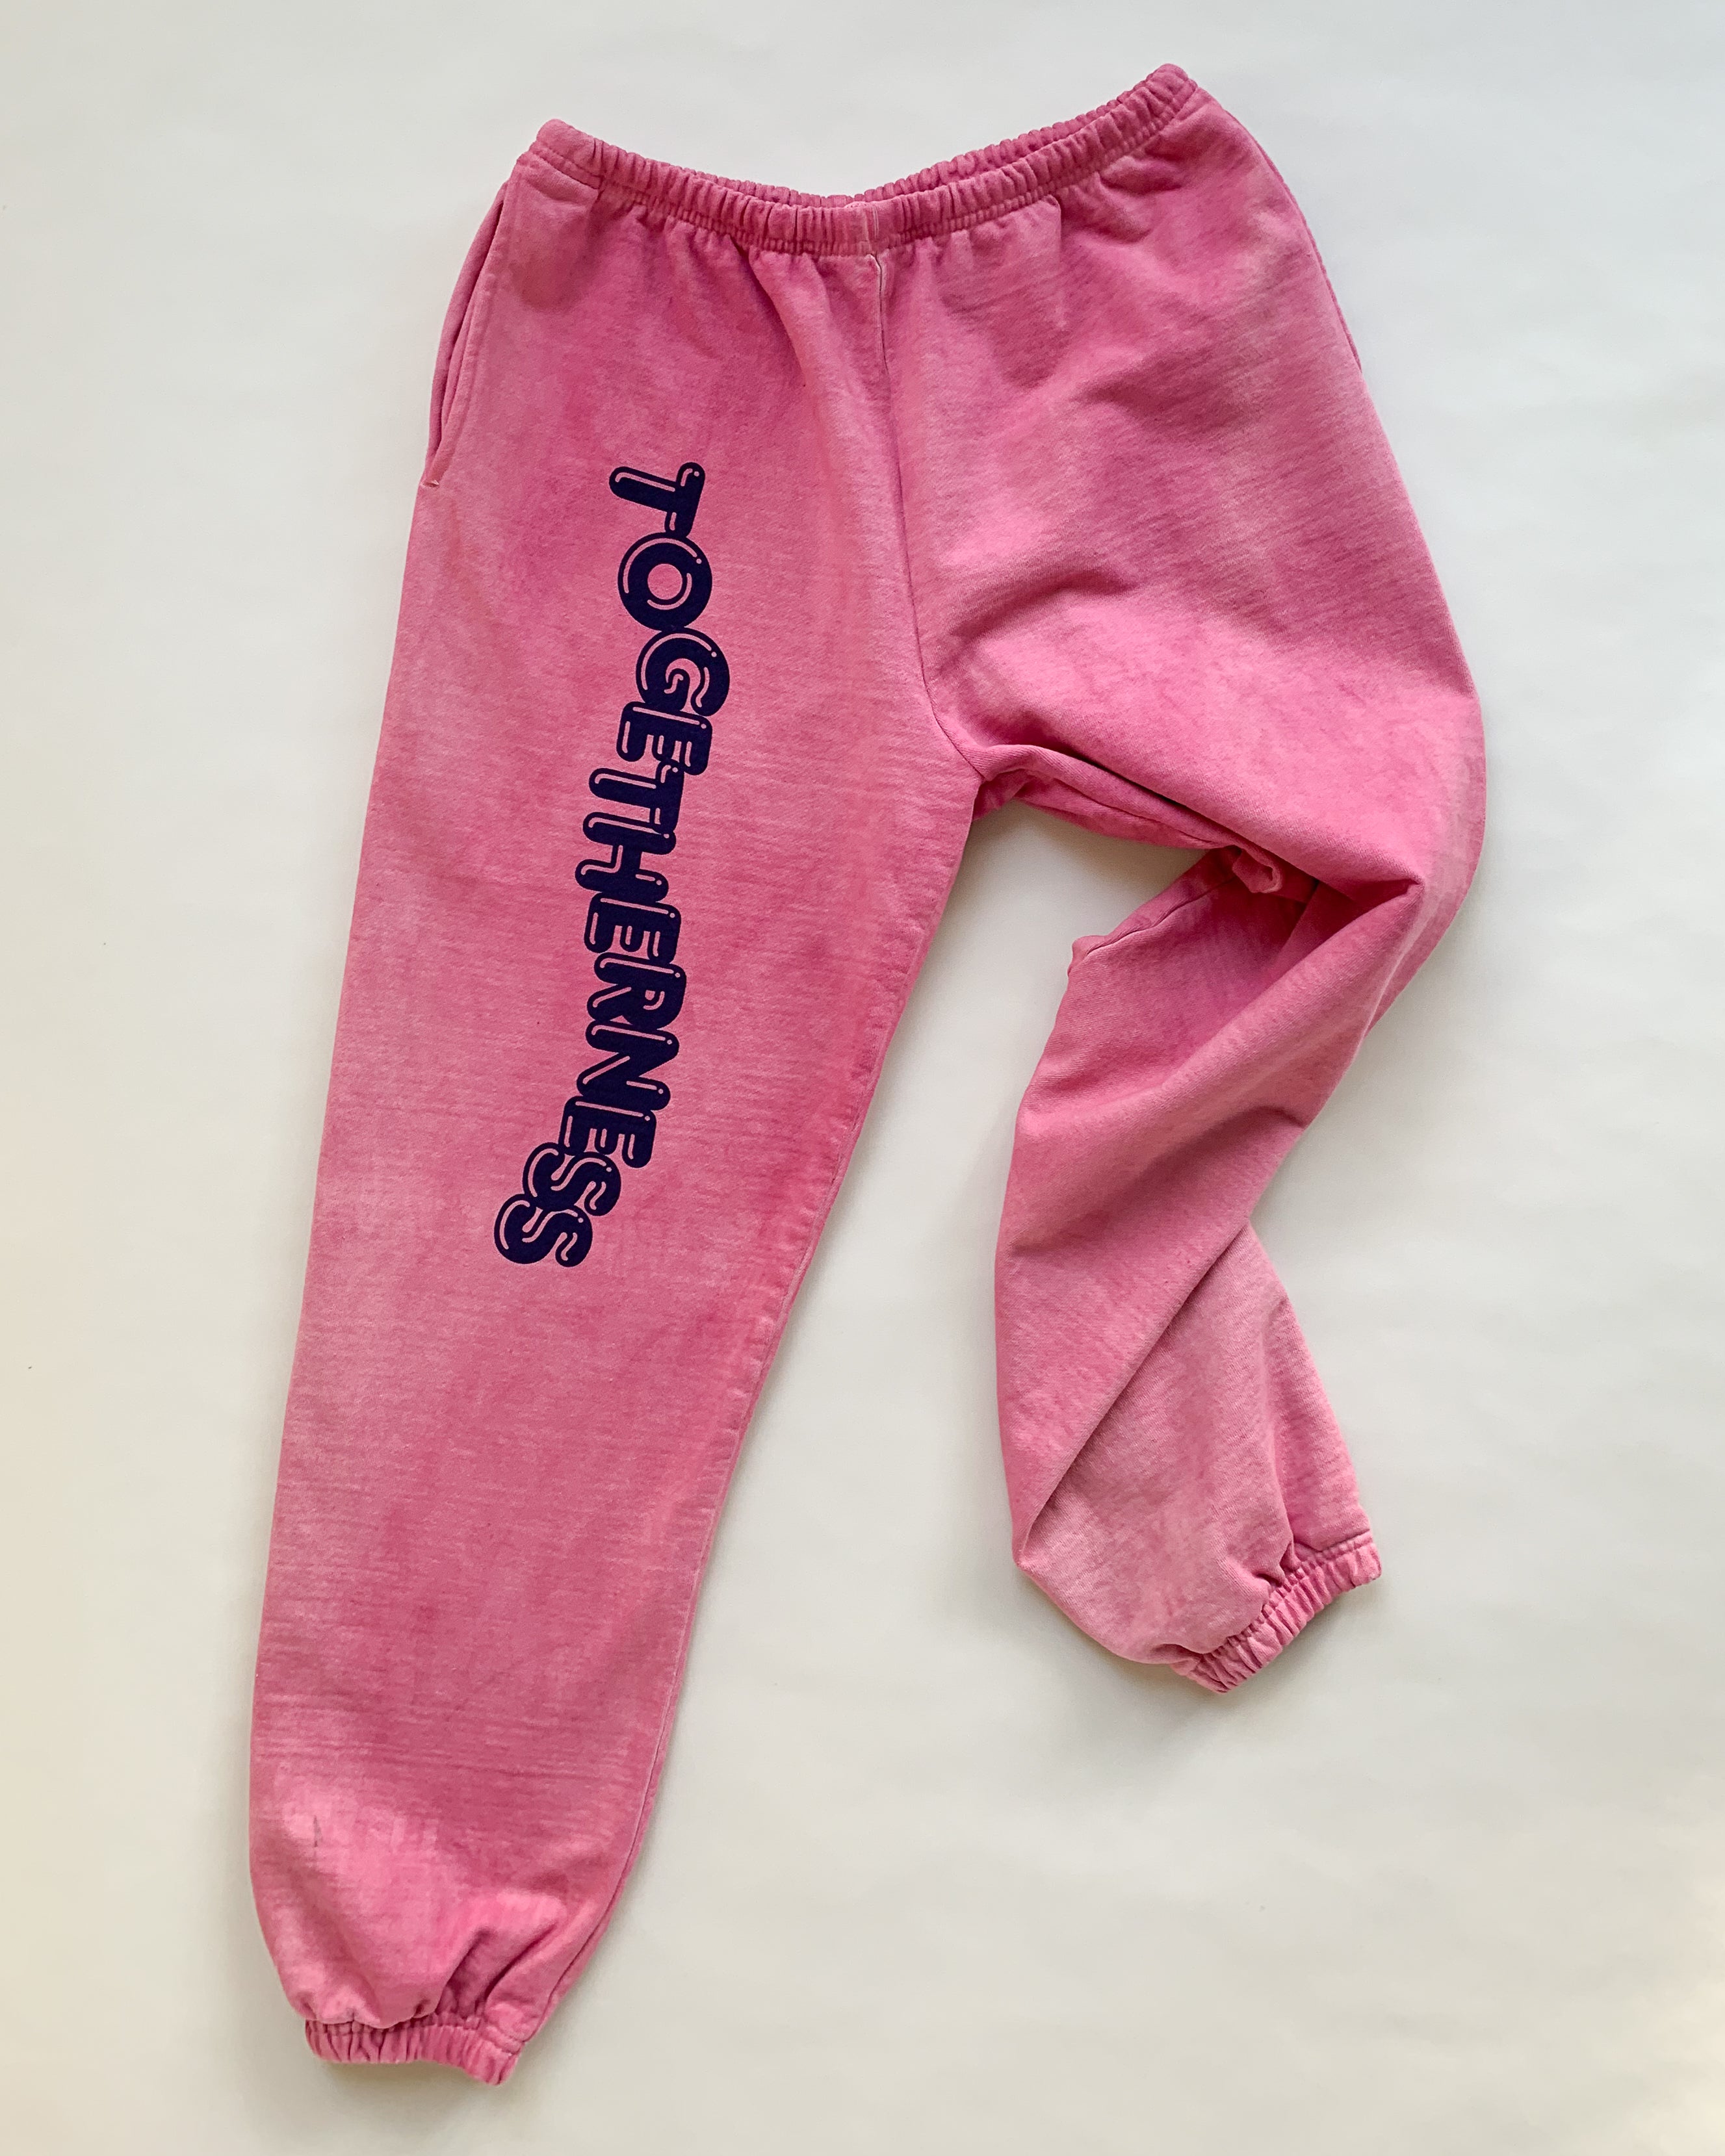 Unisex Togetherness Foreverness Sweatpants — Pink Cochineal Dye